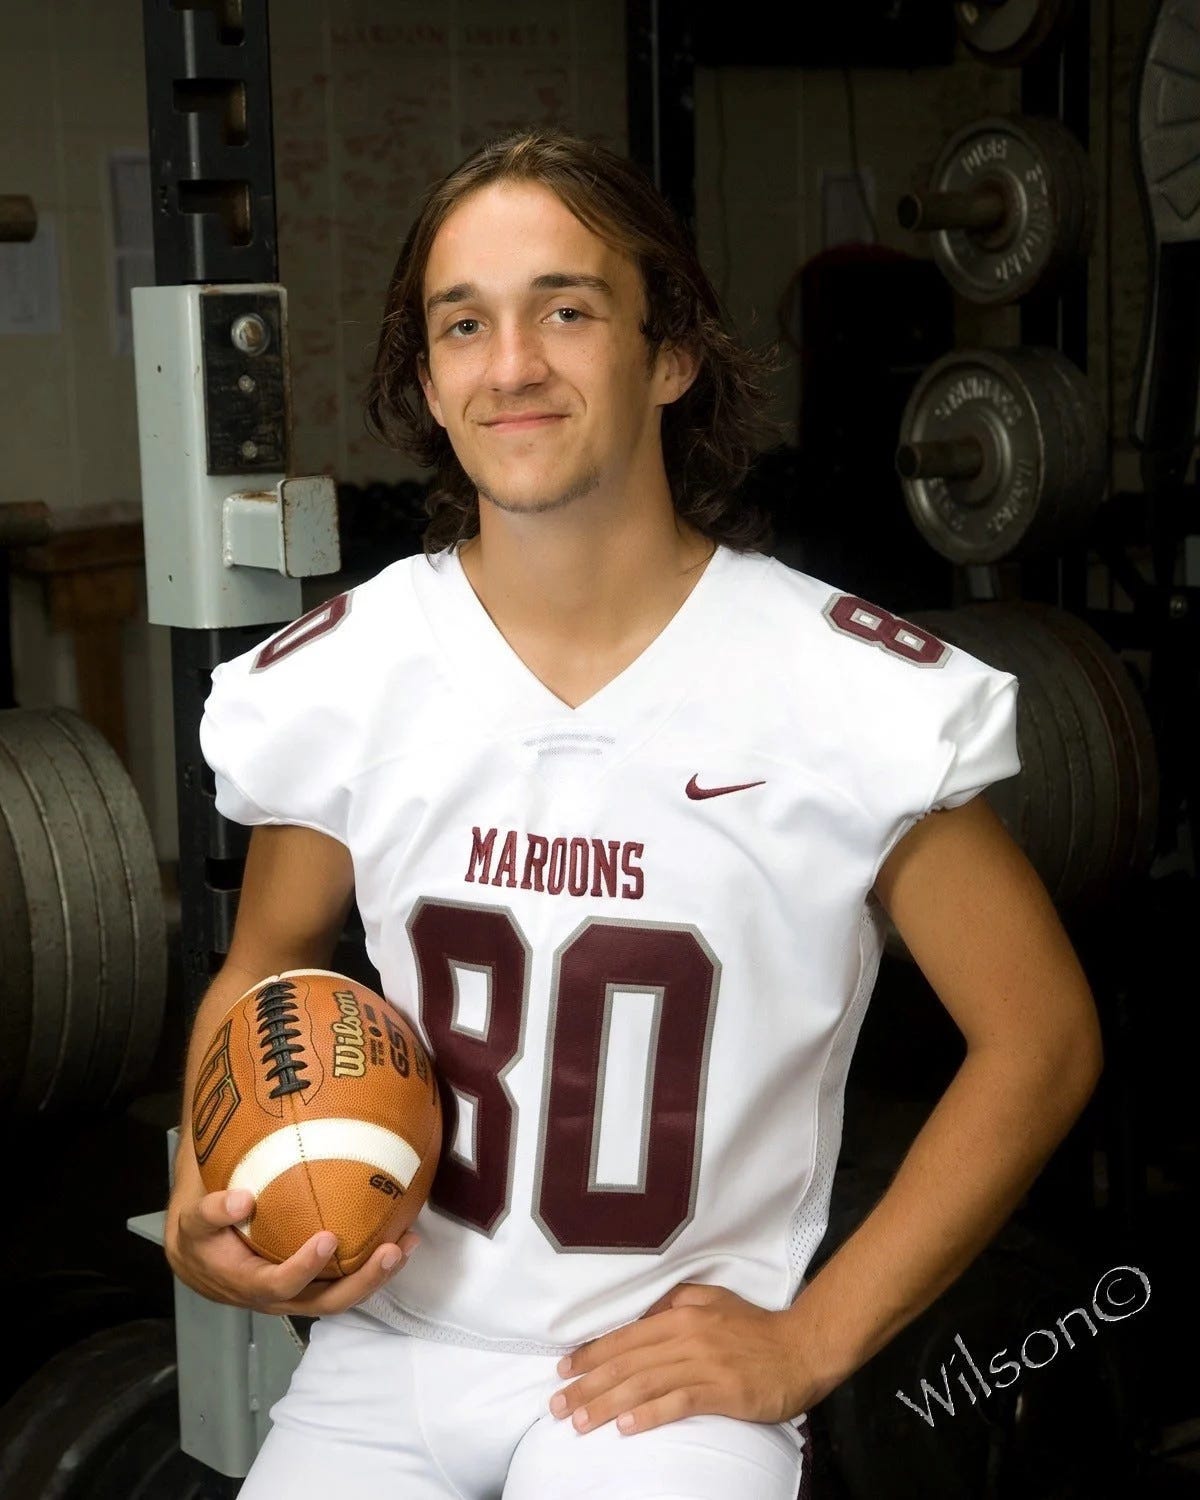 Andrew Dodson was a Pulaski County football player. He died Monday, April 3, 2023 after sustaining a head injury during a football game during the team's spring scrimmage game .